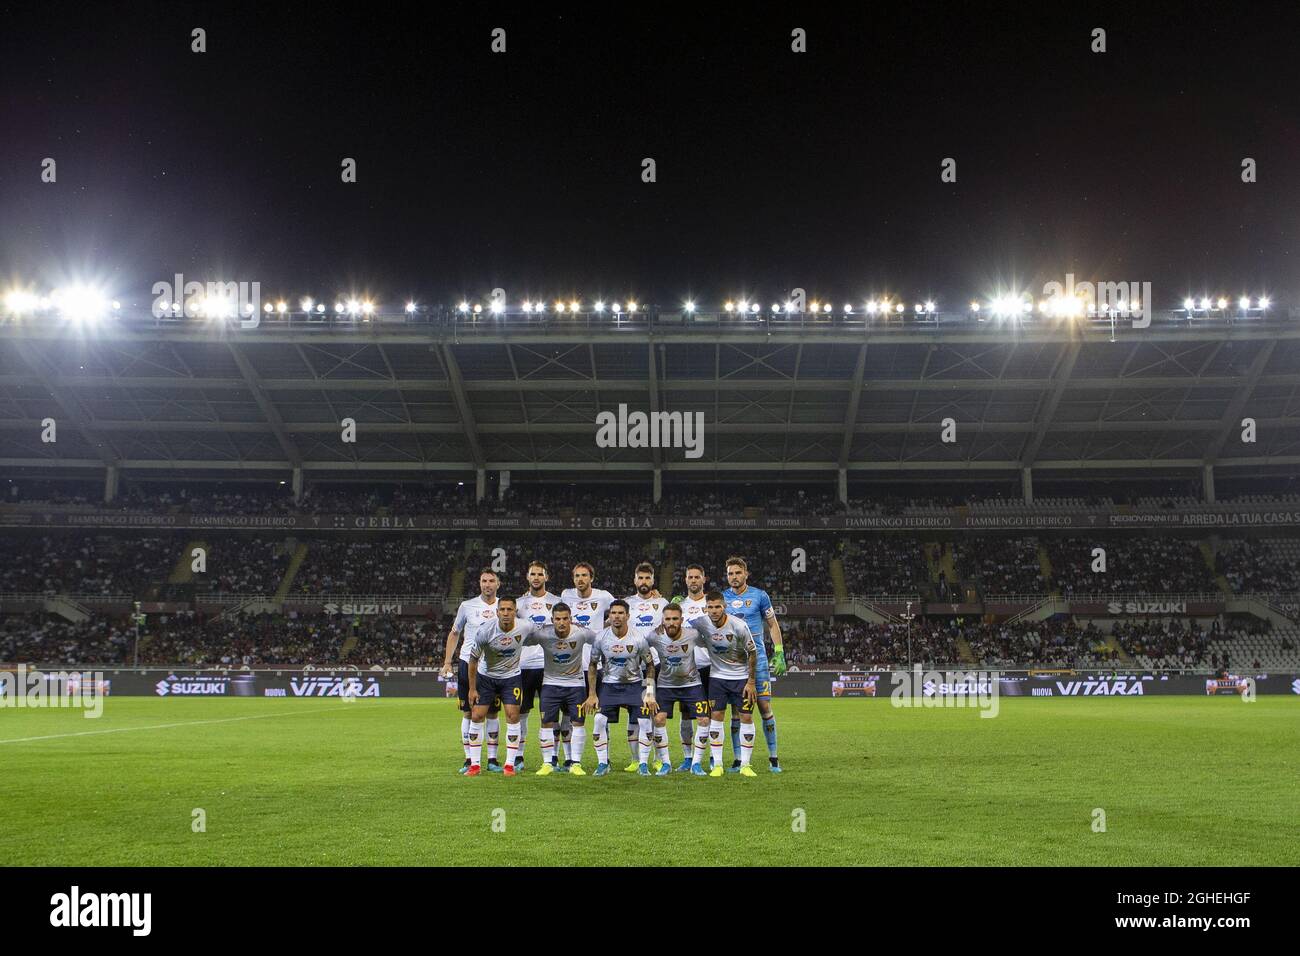 The US Lecce starting eleven line up for e team photo before kick off, back row ( L to R ); Fabio Lucioni, Panagiotis Tachtsidis, Andrea Tabanelli, Luca Rossettini, Andrea Rispoli and Gabriel, front row ( L to R ); Gianluca Lapadula, Filippo Falco, Diego Farias, Zan Majer and Marco Calderoni during the Serie A match at Stadio Grande Torino, Turin. Picture date: 16th September 2019. Picture credit should read: Jonathan Moscrop/Sportimage via PA Images Stock Photo